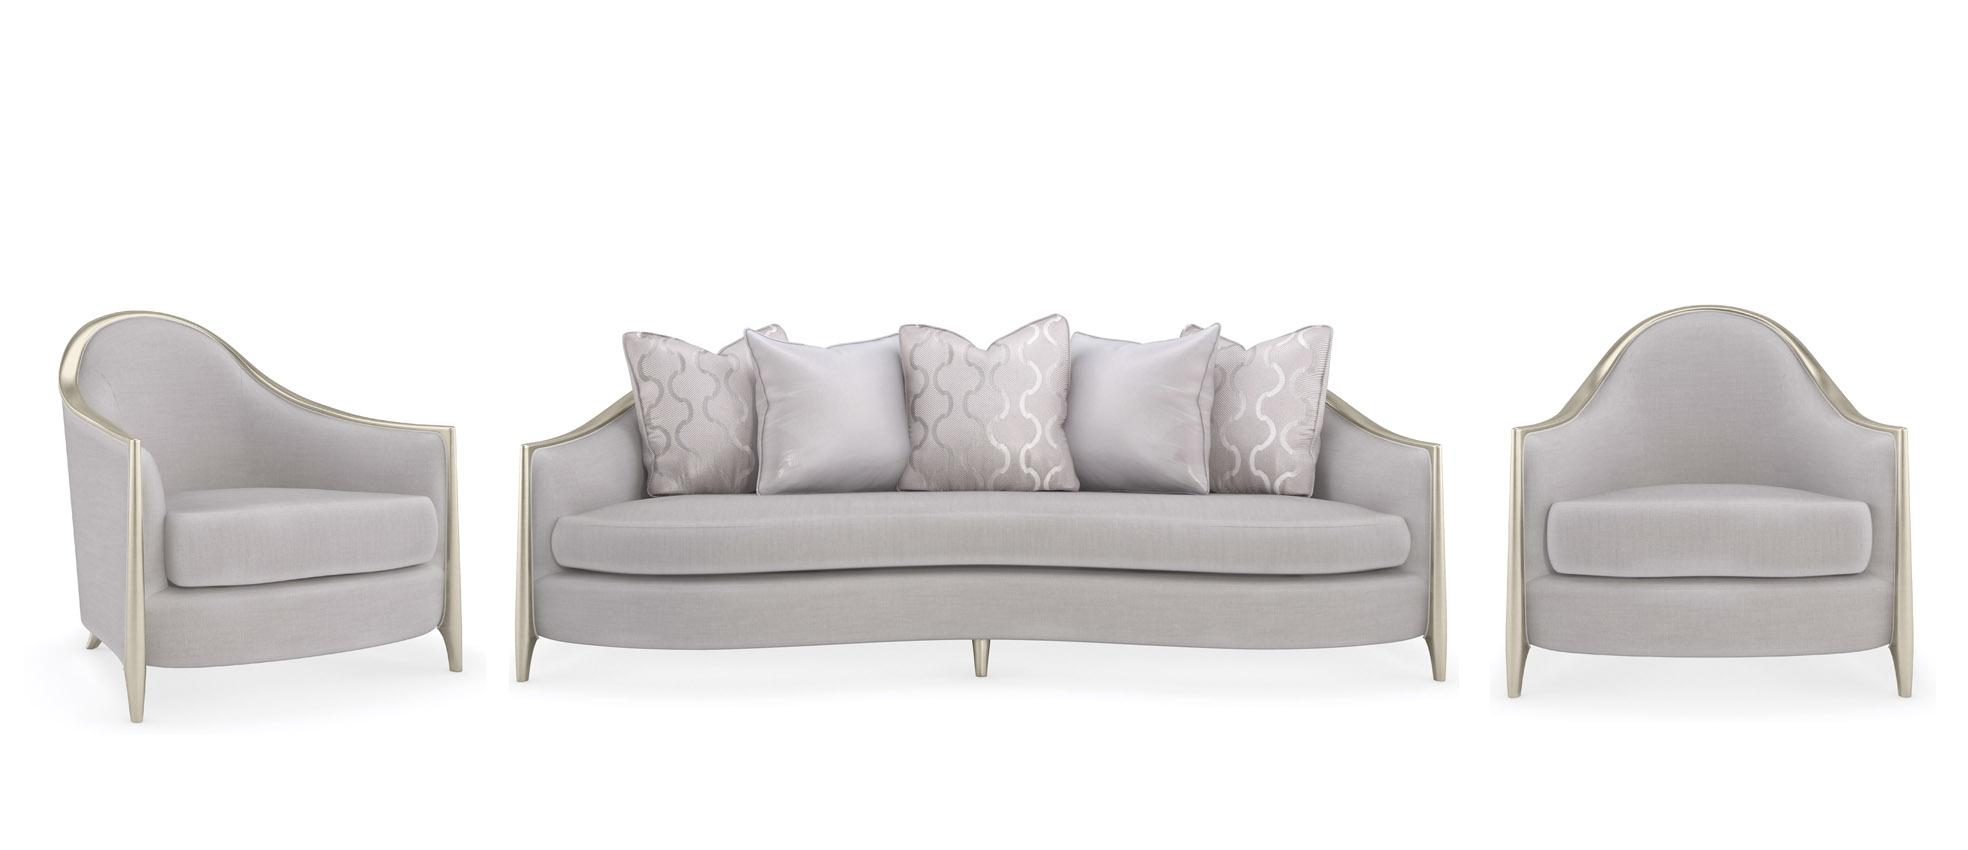 Traditional Sofa and Chair SIMPLY STUNNING UPH-421-111-A-Set-3 in Light Gray, Silver Chenille